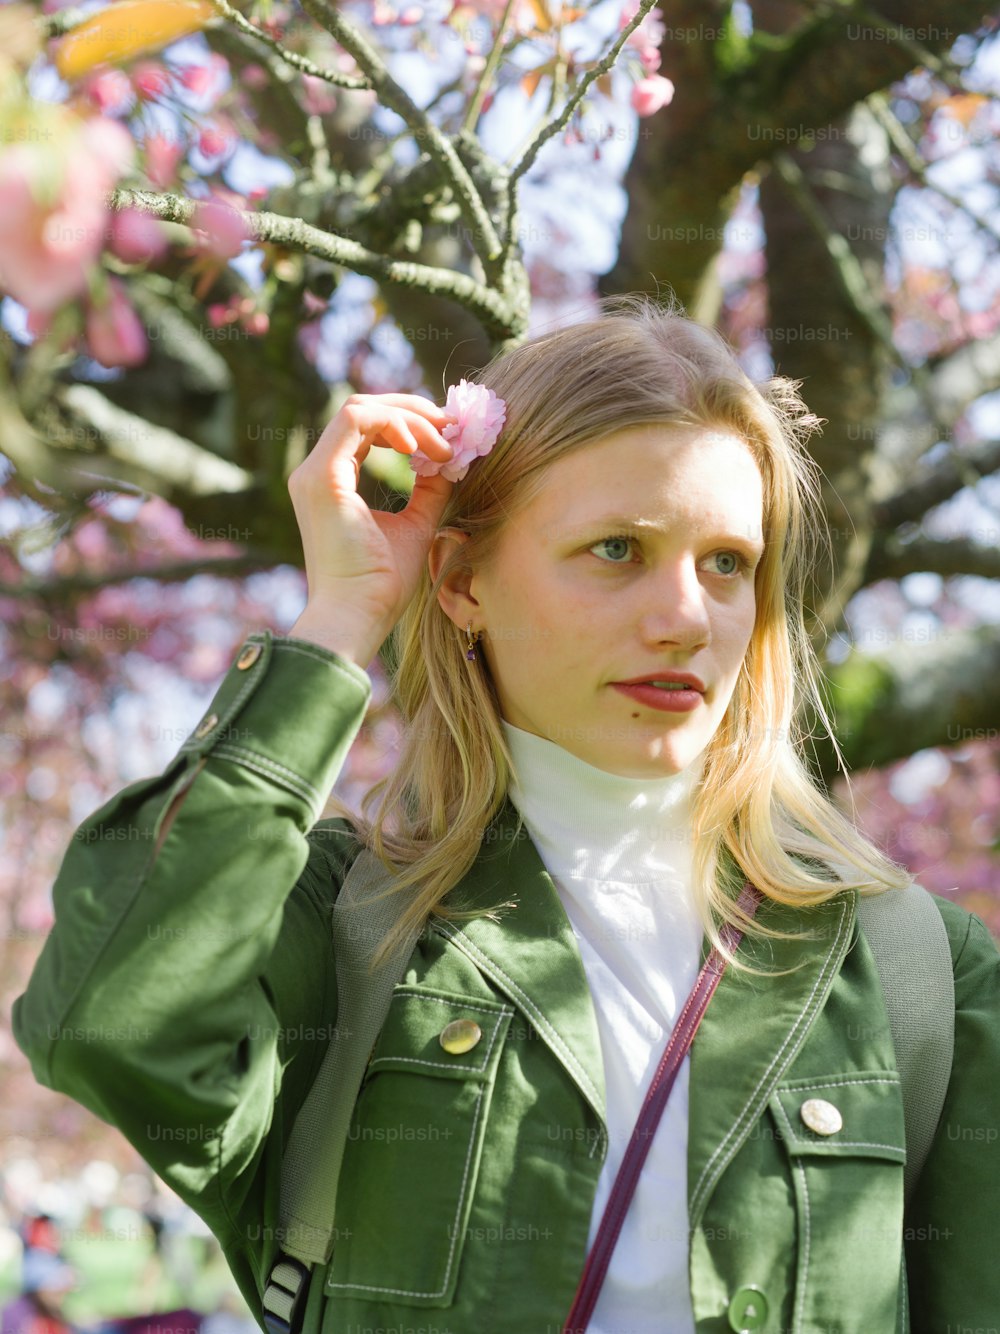 a woman in a green jacket is holding a flower in her hair